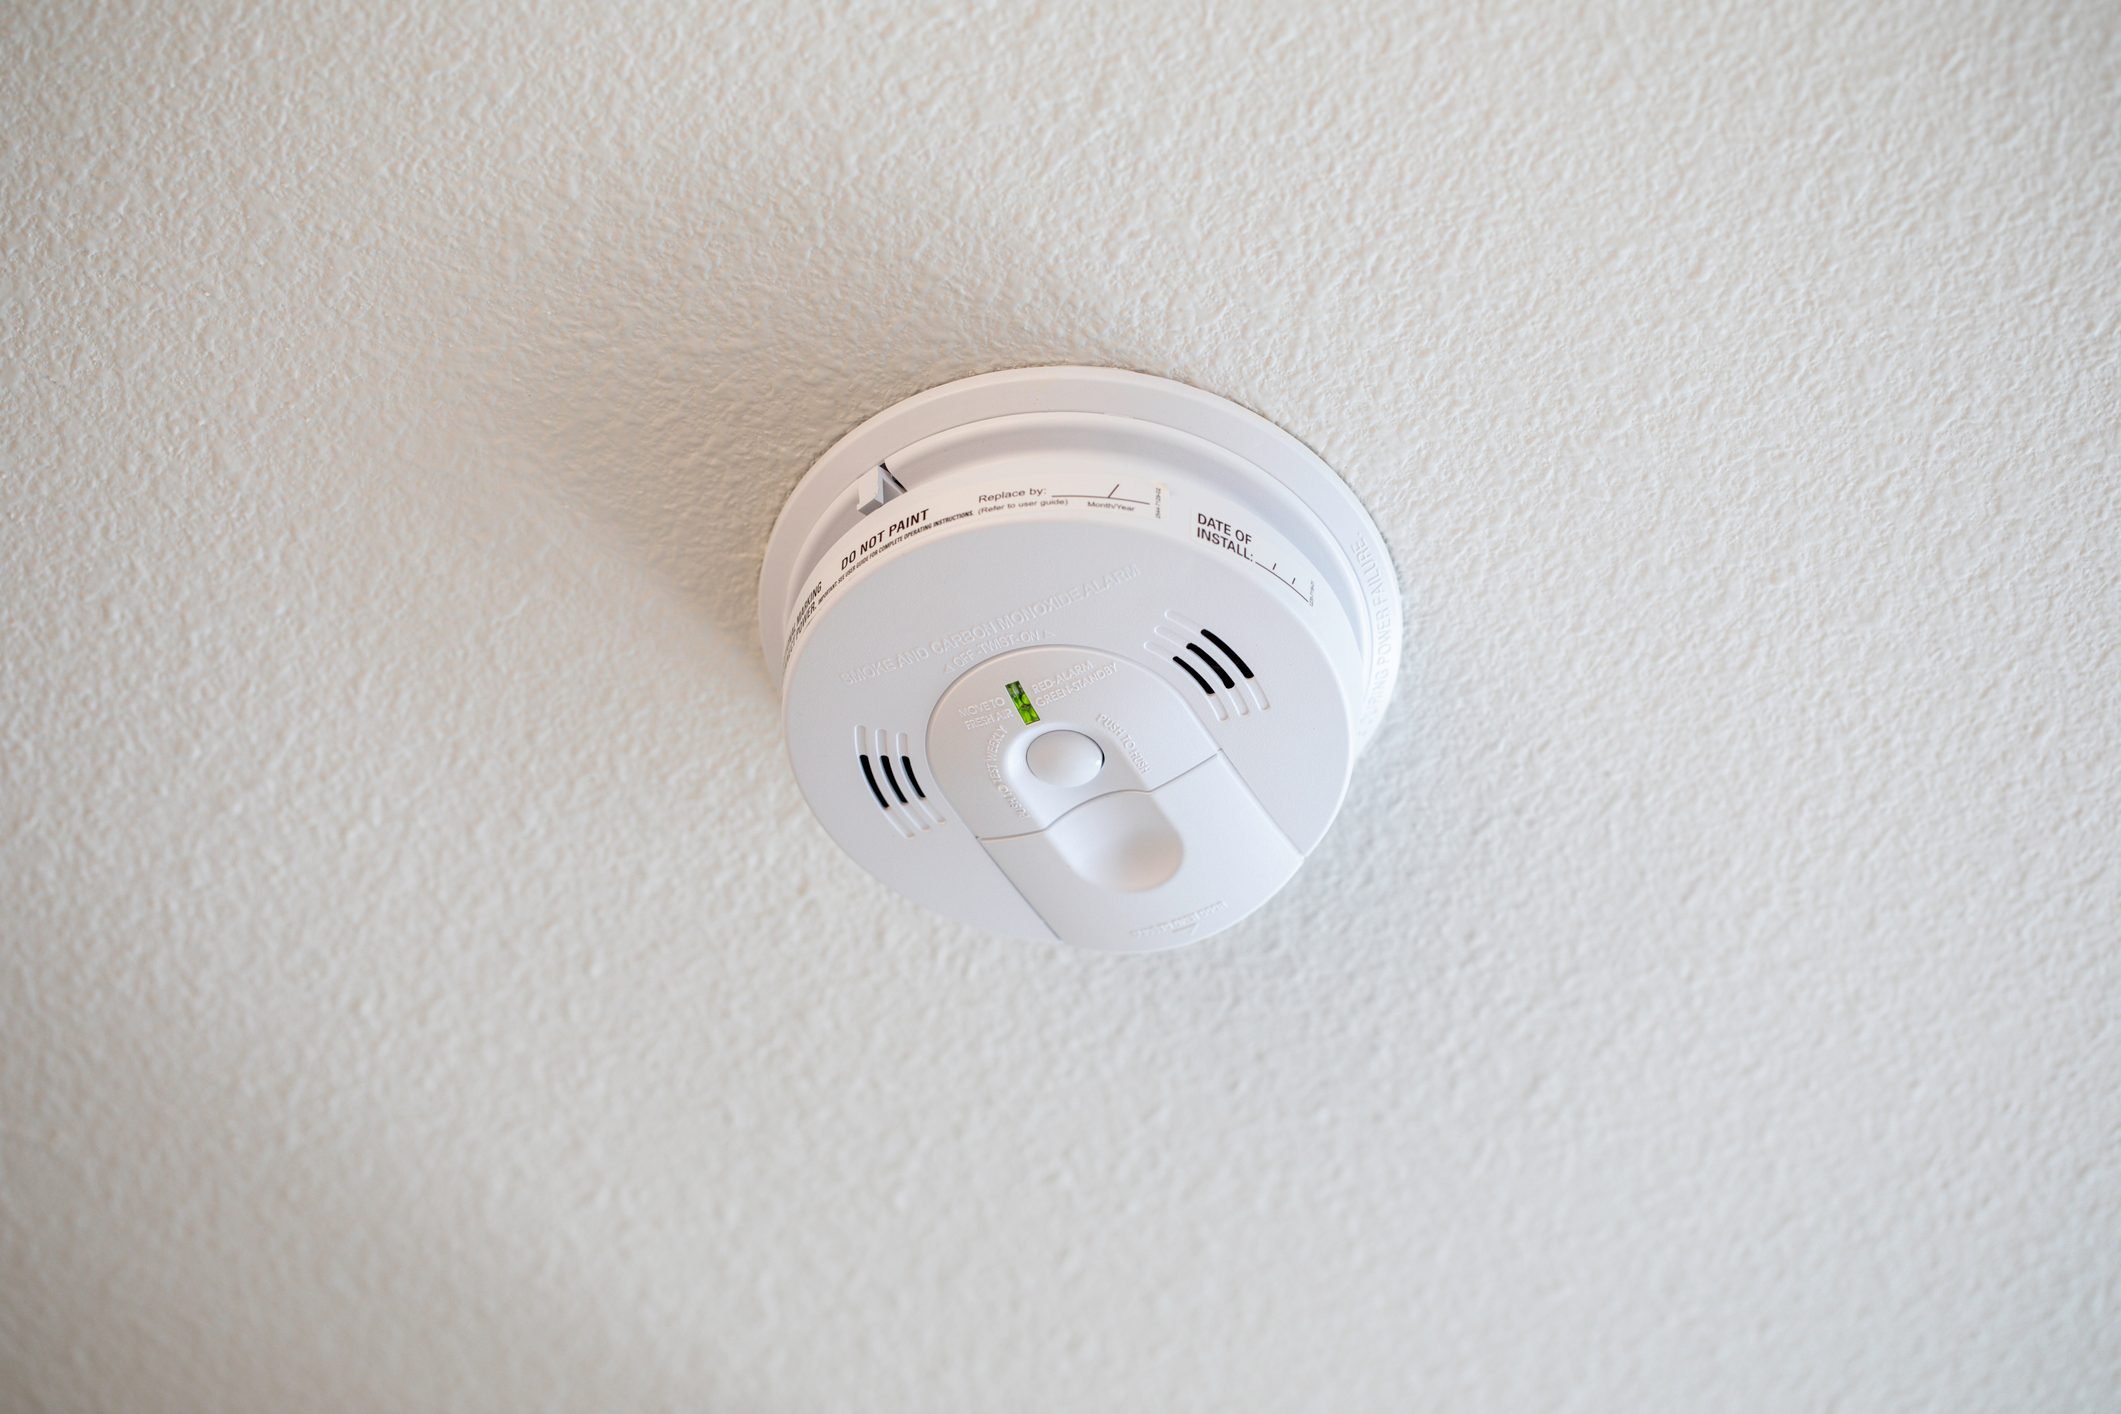 What To Know About the New Smoke Alarm Standards